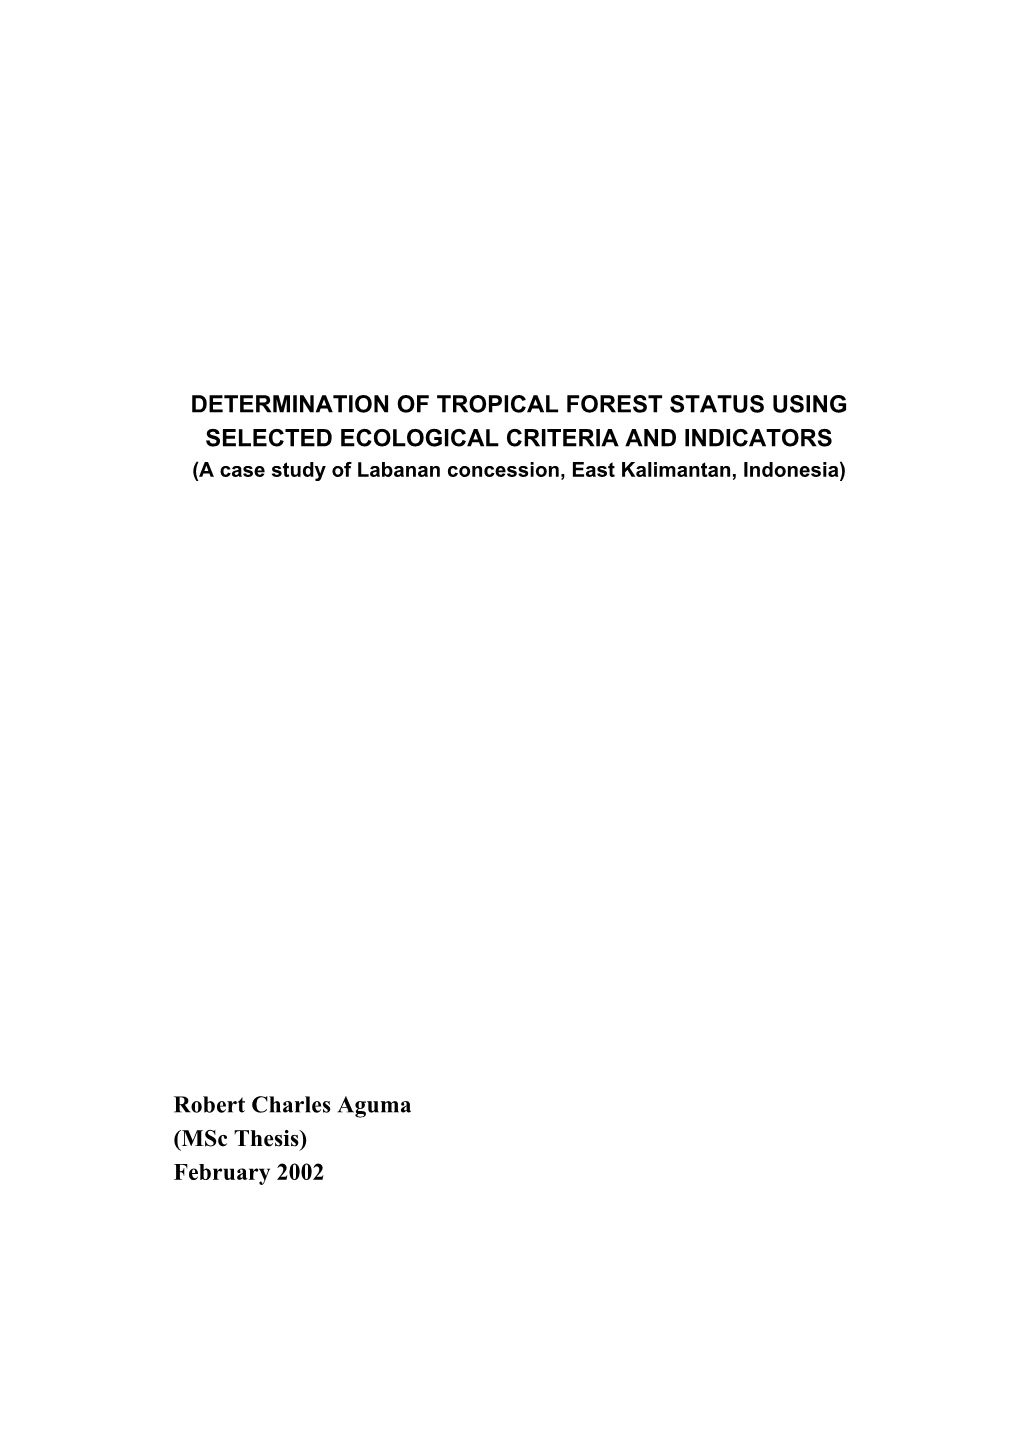 DETERMINATION of TROPICAL FOREST STATUS USING SELECTED ECOLOGICAL CRITERIA and INDICATORS (A Case Study of Labanan Concession, East Kalimantan, Indonesia)